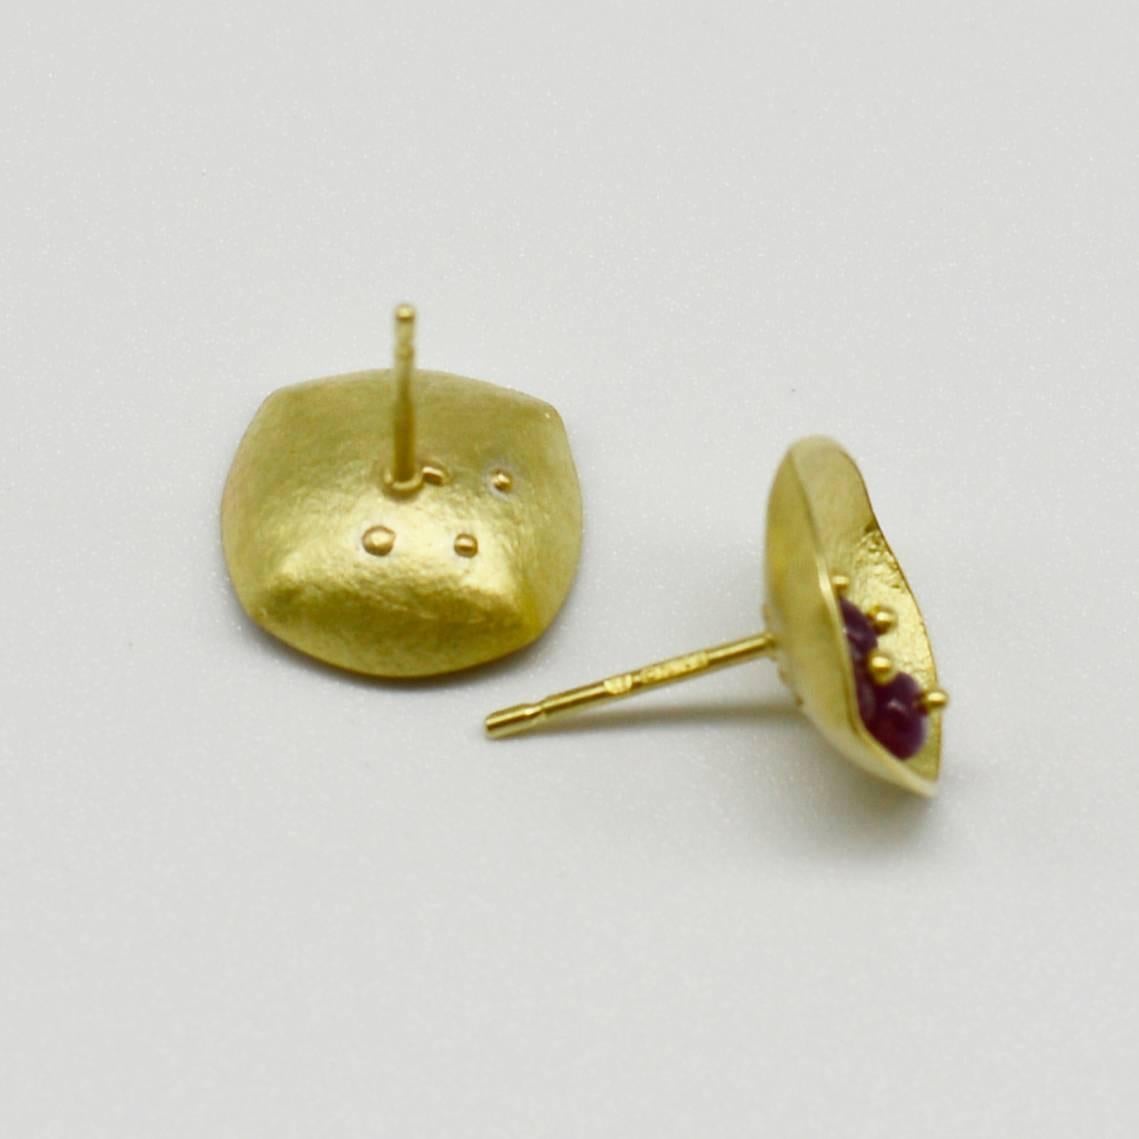 Berry-like ruby beads are placed in a simple square shape made of gold sheet. These beads are attached with a fusing technique, using a spot welding machine whose pinpoint accuracy protects the stones from heat damage.   